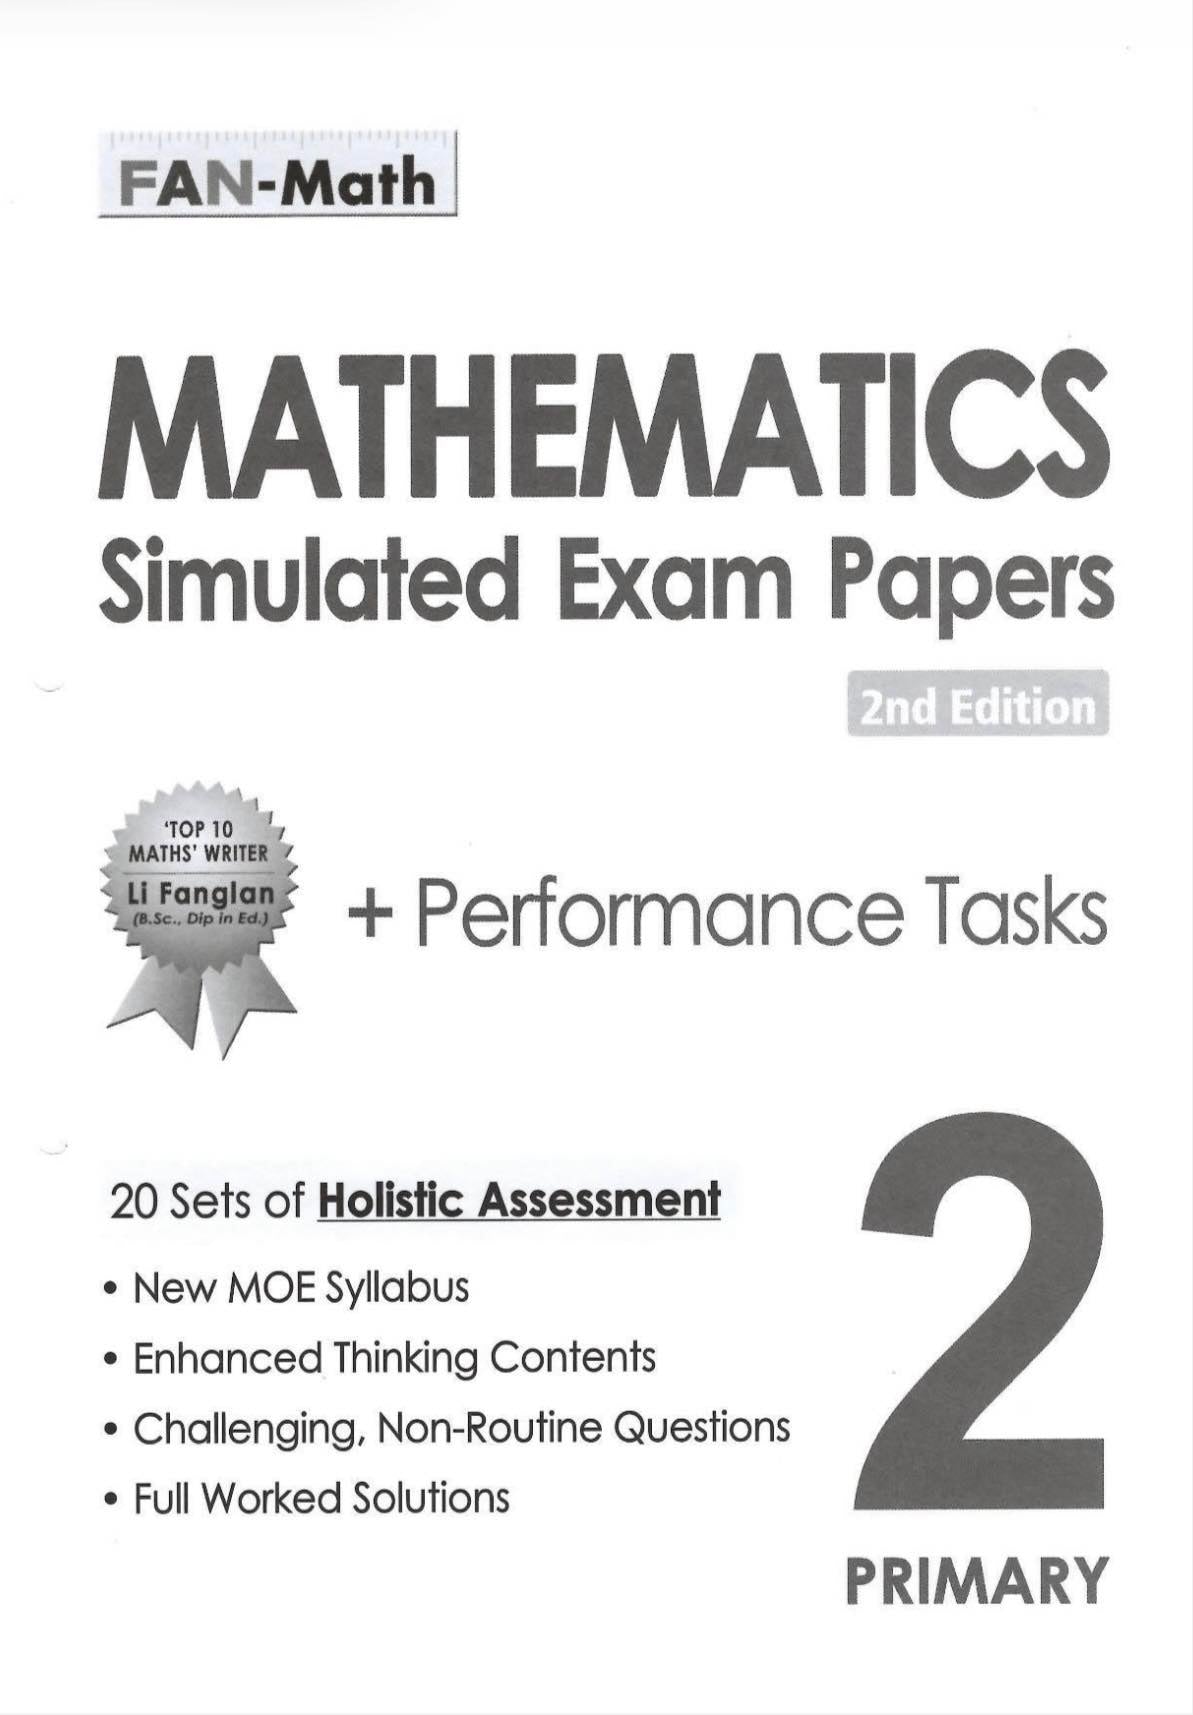 Mathematics Simulated Exam Papers for Primary Levels